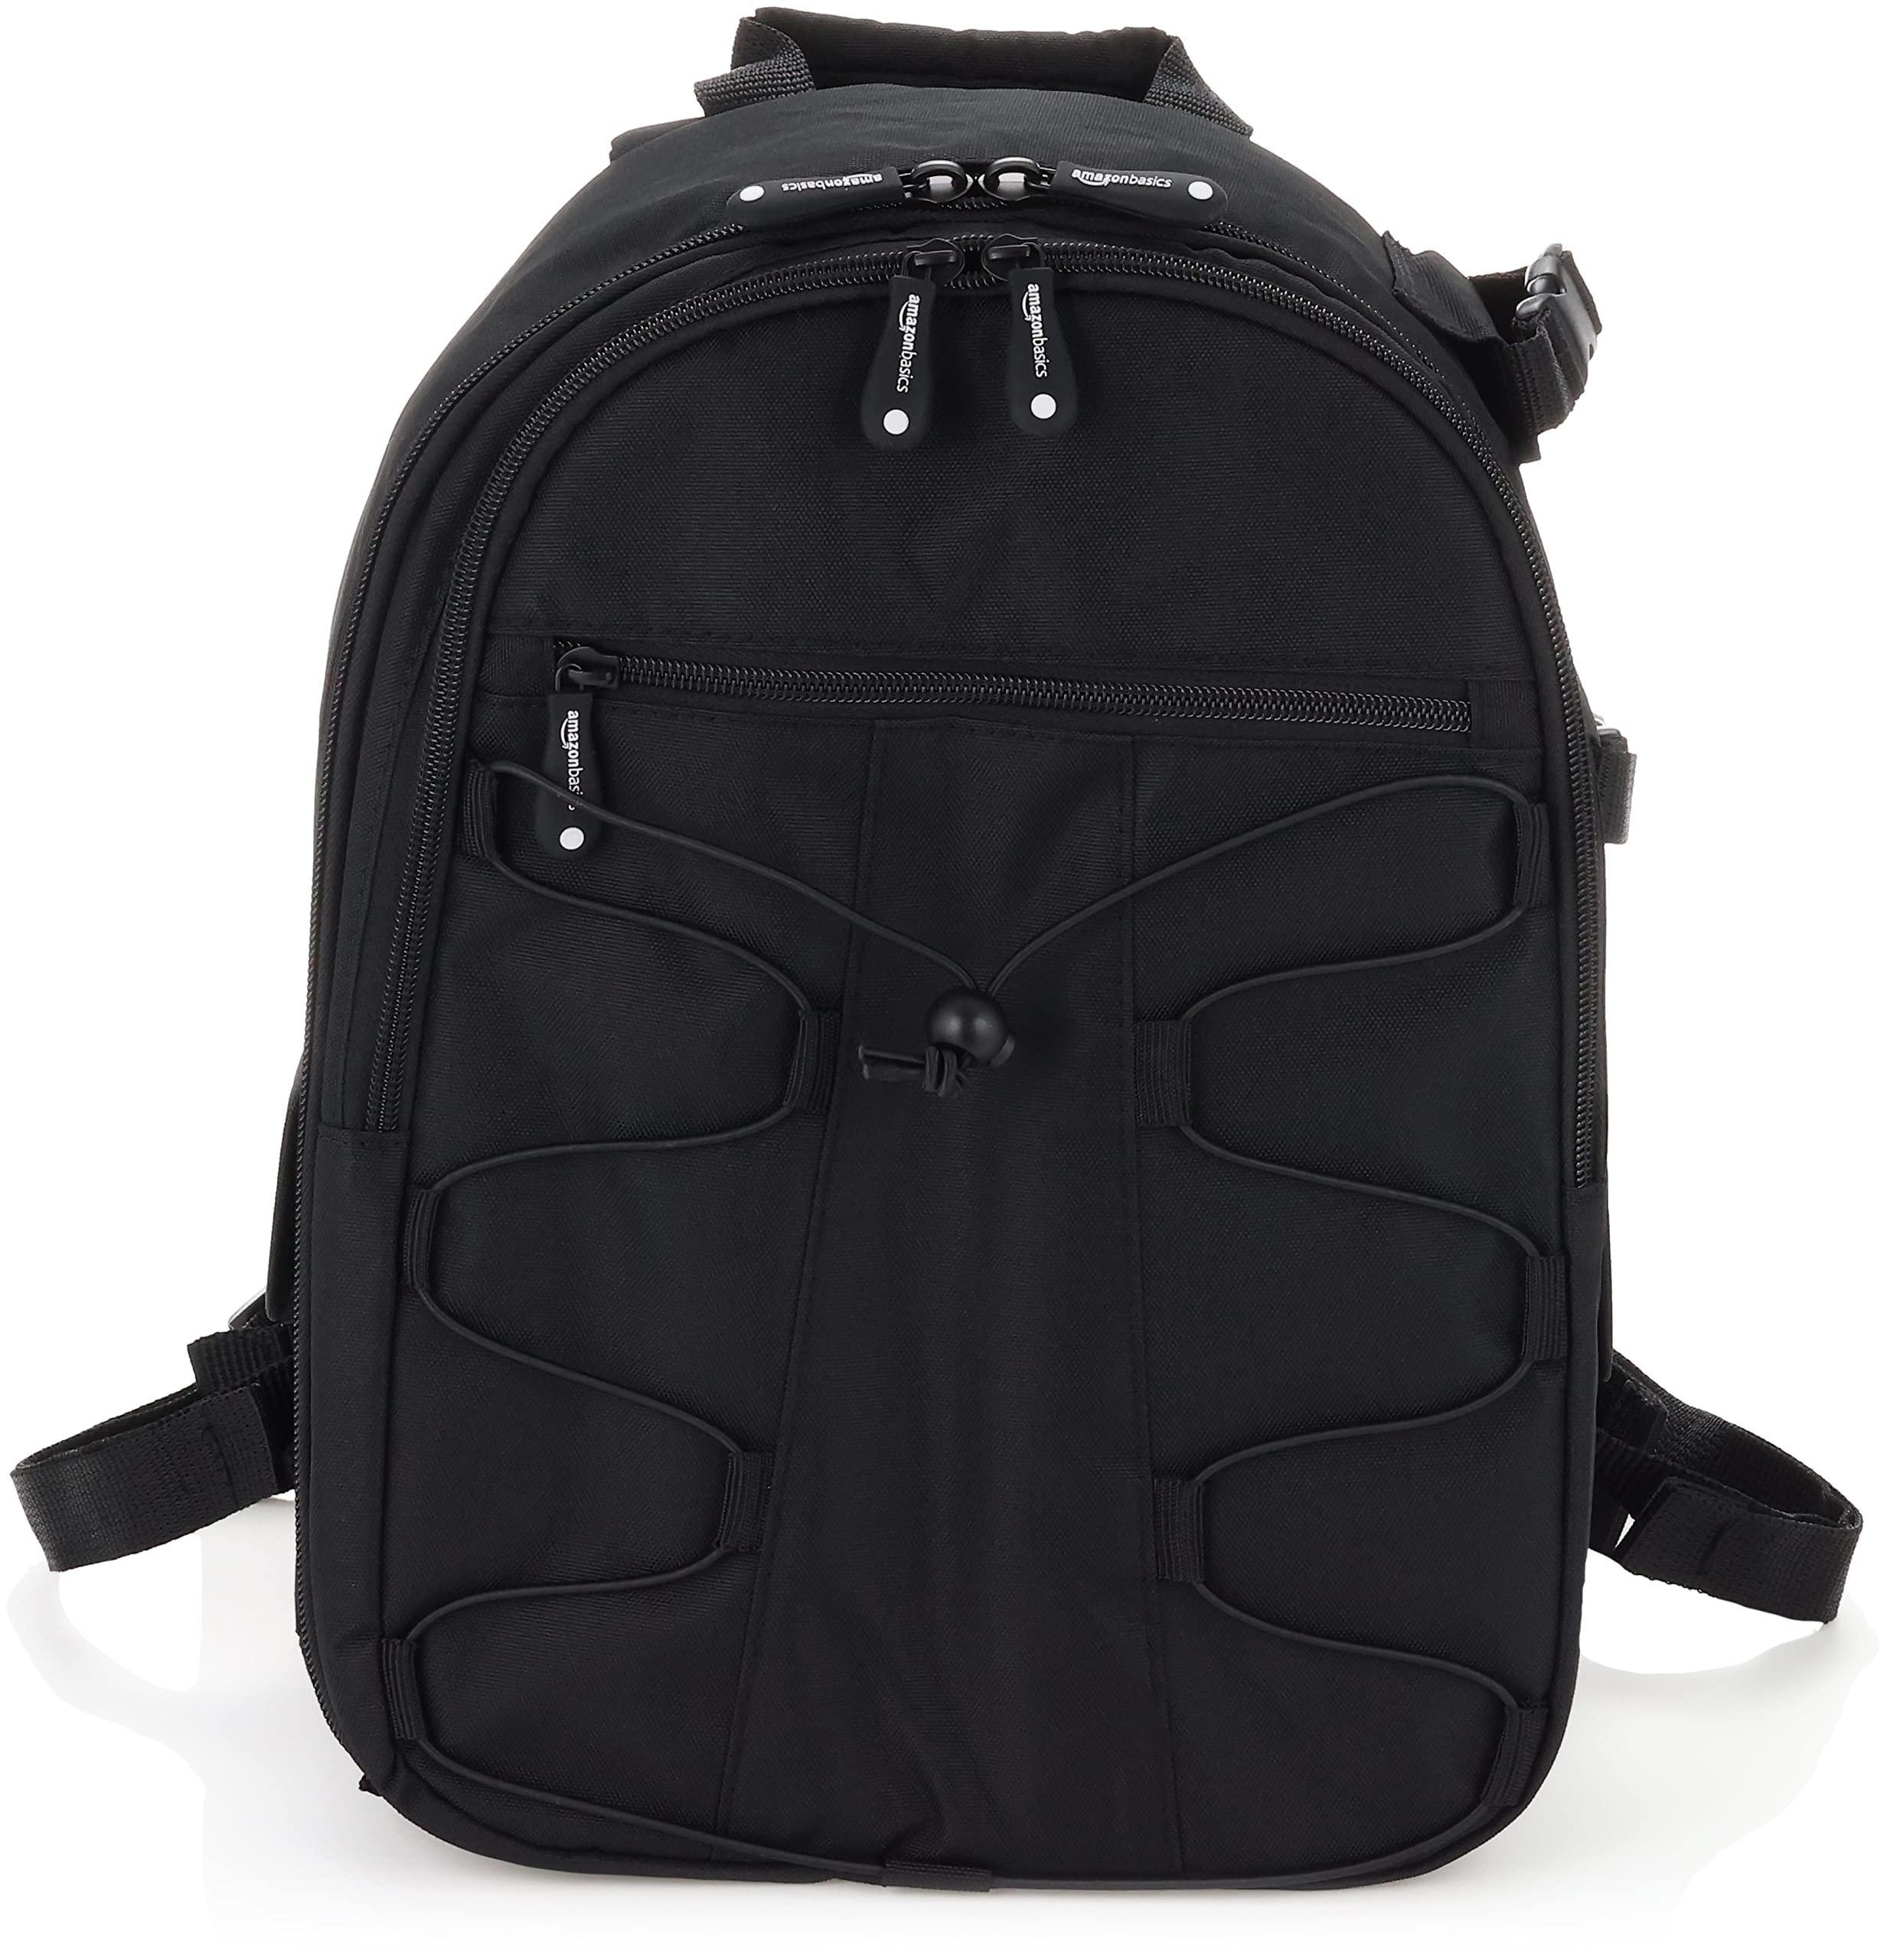 Amazon Basics Backpack for SLR Cameras and Accessories-Black